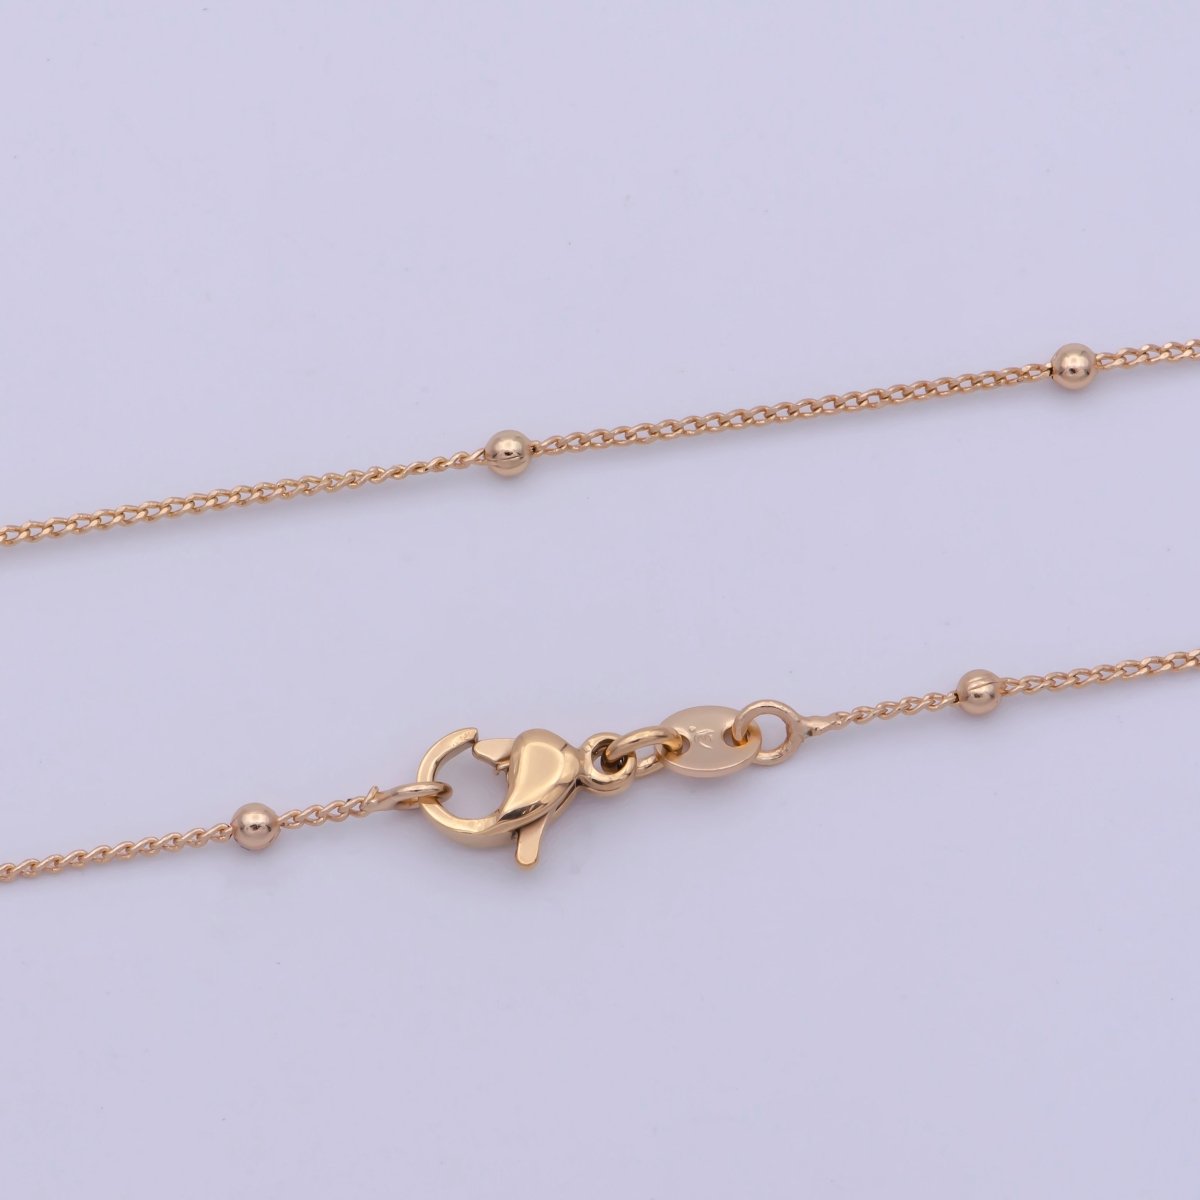 18K Gold Filled Satellite Chain, 0.9mm Gold Ball Chain 18 Inches Ready To Wear Necklace w/ Lobster Clasps | WA-477 Clearance Pricing - DLUXCA